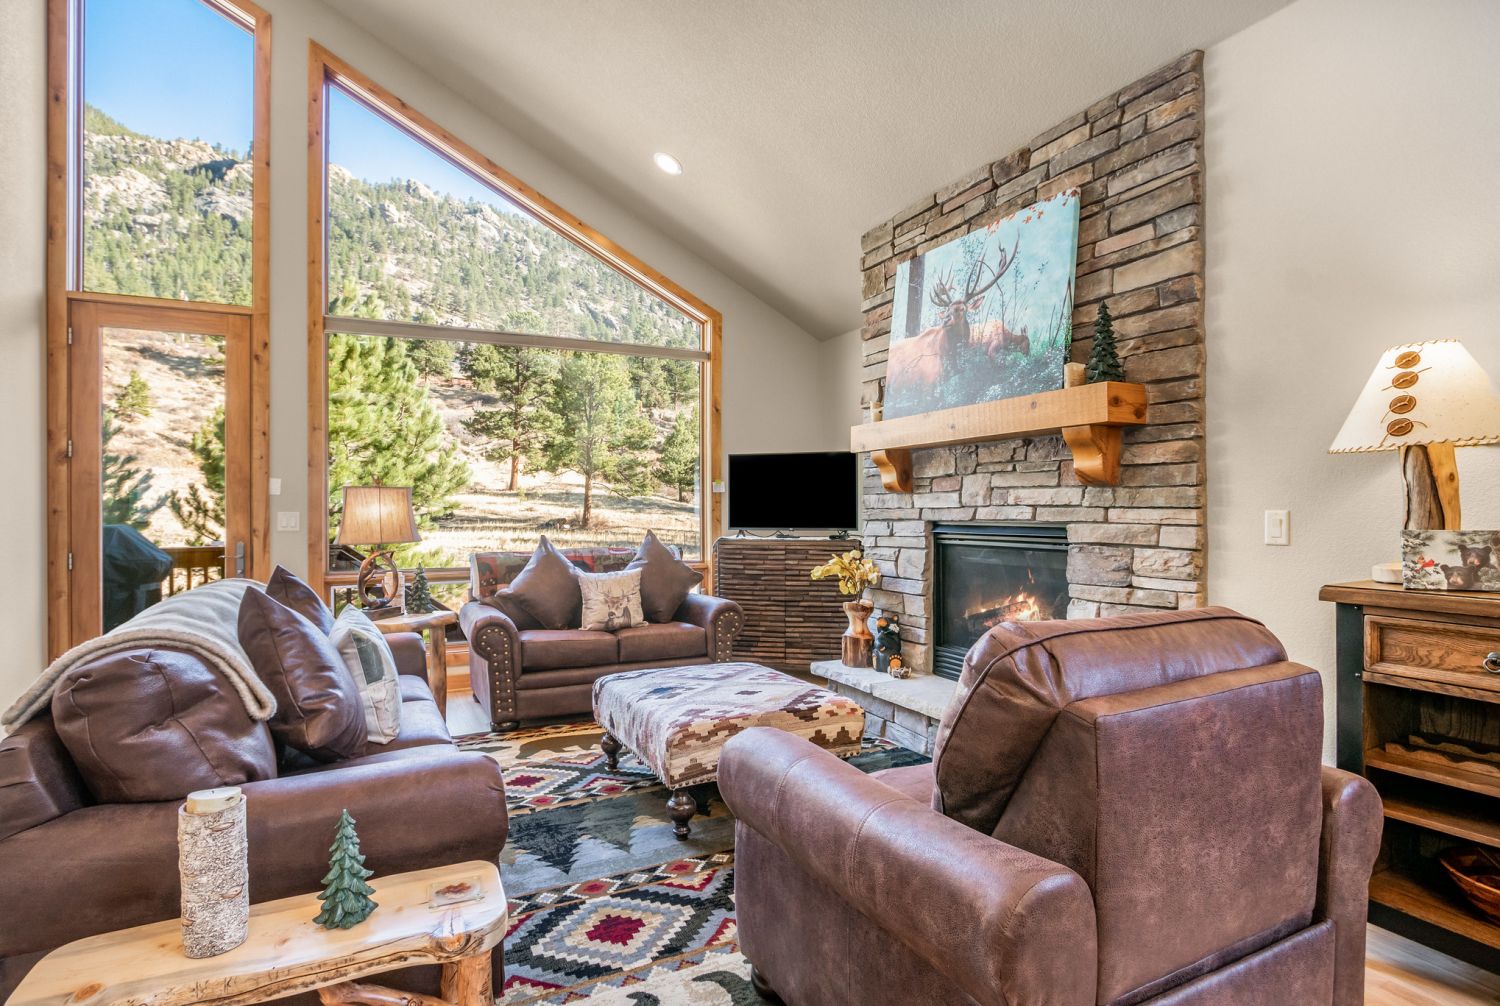 River Rock Retreat - Main floor living room with ample sofa seating, gas fireplace, and a serene view out to the deck. Townhome is adorned with charming mountain decor.